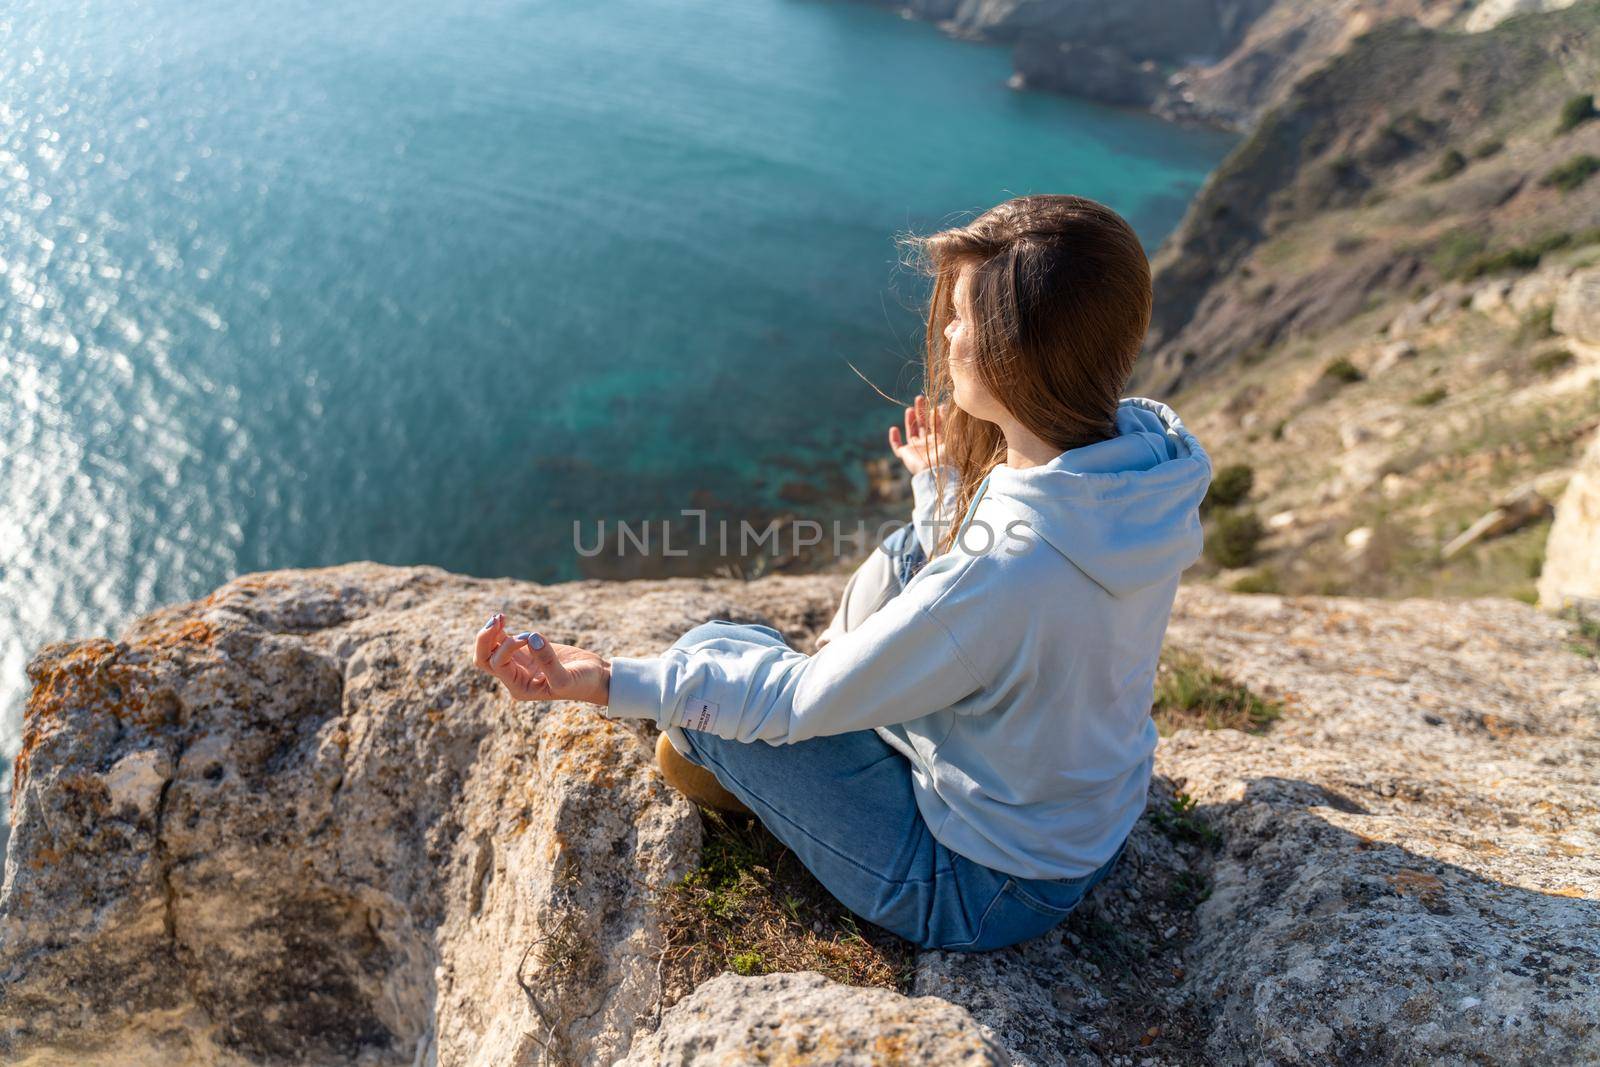 Woman tourist enjoying the sunset over the sea mountain landscape. Sits outdoors on a rock above the sea. She is wearing jeans and a blue hoodie. Healthy lifestyle, harmony and meditation.